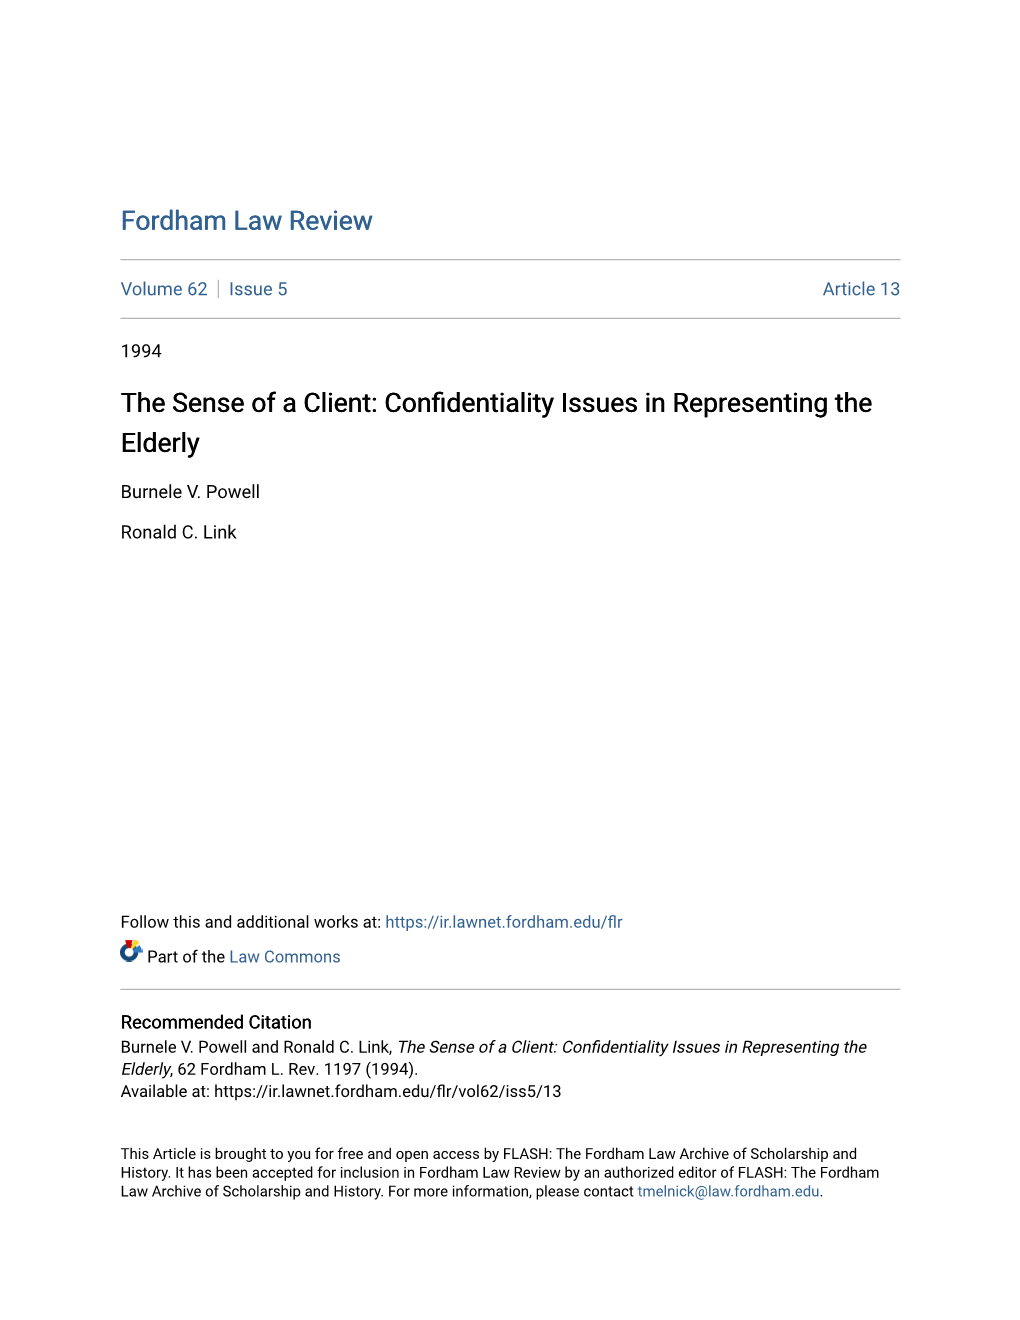 The Sense of a Client: Confidentiality Issues in Representing the Elderly